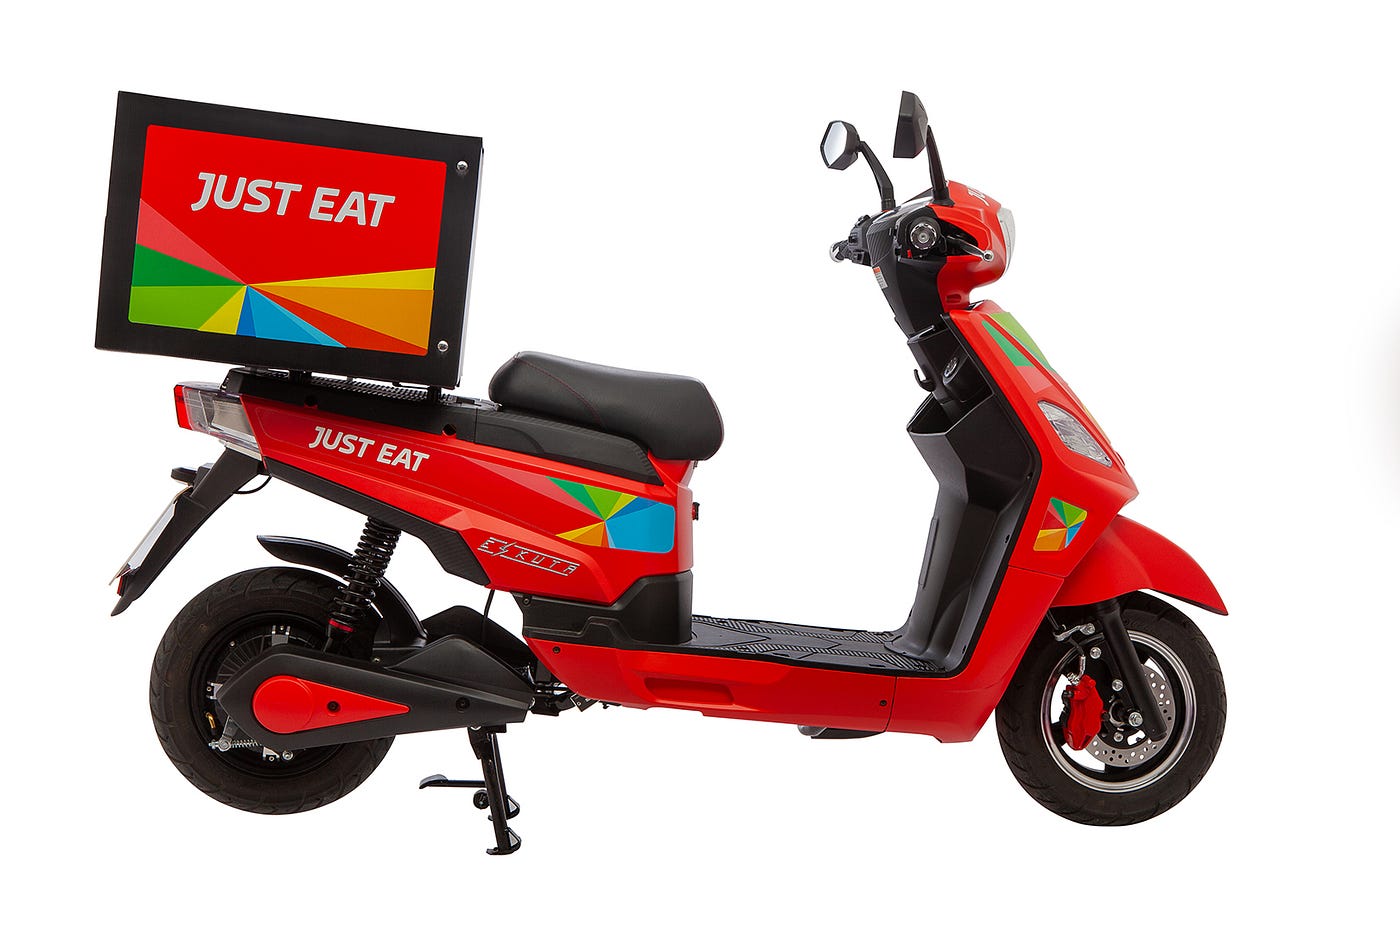 Just Eat rejects Prosus' $6.3 billion takeover bid in favour of Takeaway  merger | by Techloy | Techloy | Business and technology news & data in  emerging markets | Medium